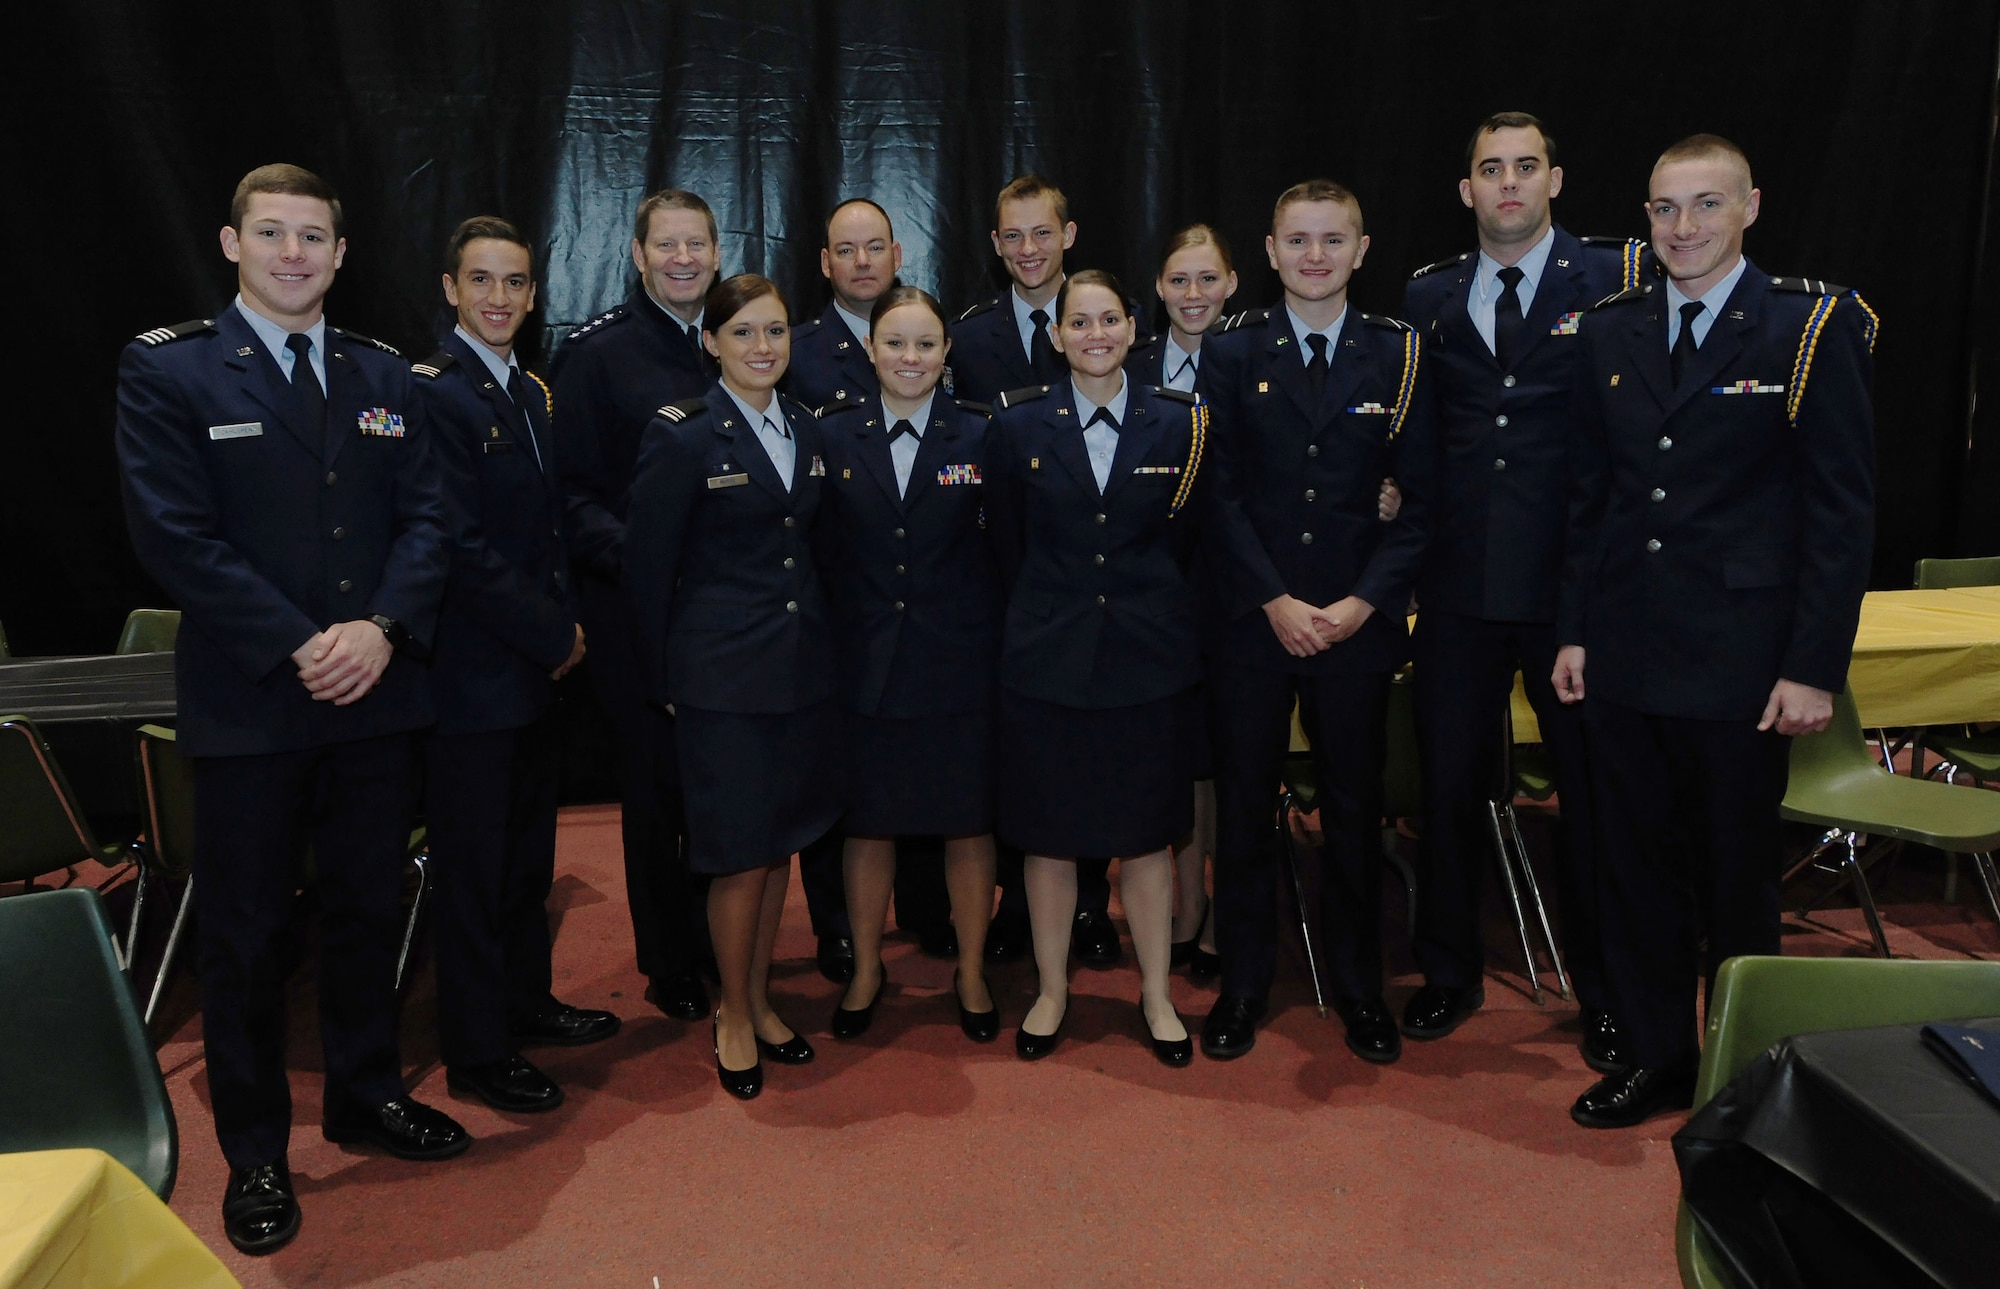 Air Force ROTC Detachment 440 cadets from the University of Missouri stand with Gen. Robin Rand, Air Force Global Strike Command commander, Oct. 3, 2015, in Columbia, Missouri. While attending Mizzou’s military appreciation game, Rand met with the ROTC cadets and answered their questions about the U.S. Air Force. (U.S. Air Force photo by Airman 1st Class Jazmin Smith/Released)